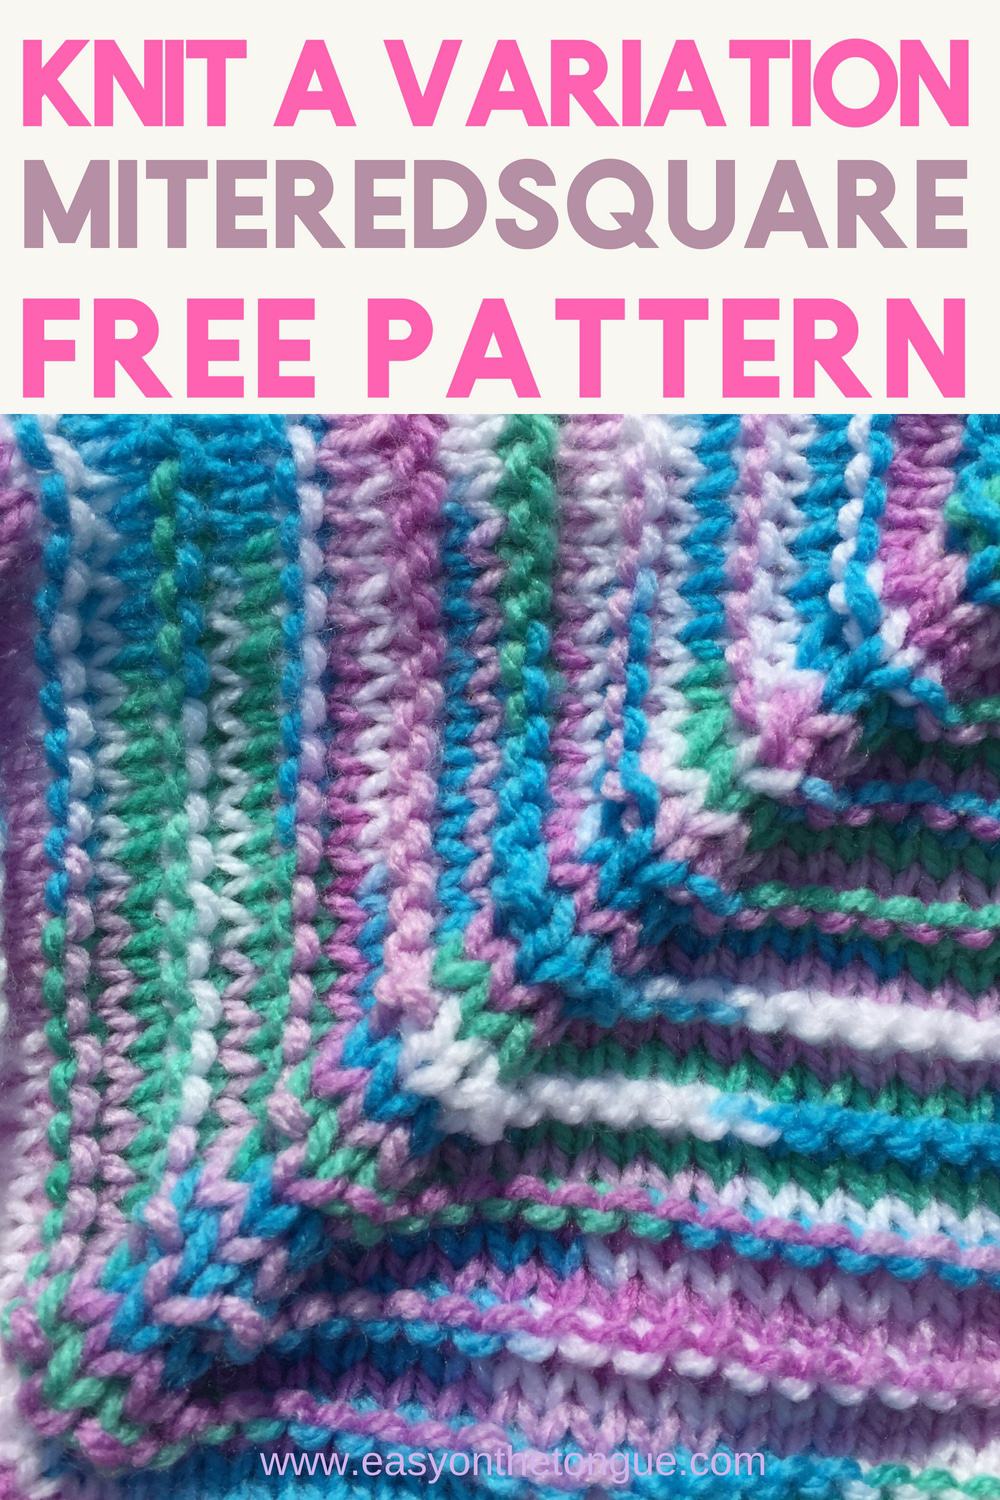 Knit Mitered Square Variation Pattern miteredsquare knitquare freeknitpattern Easy Knit Square Pattern that you’ll Love to Make